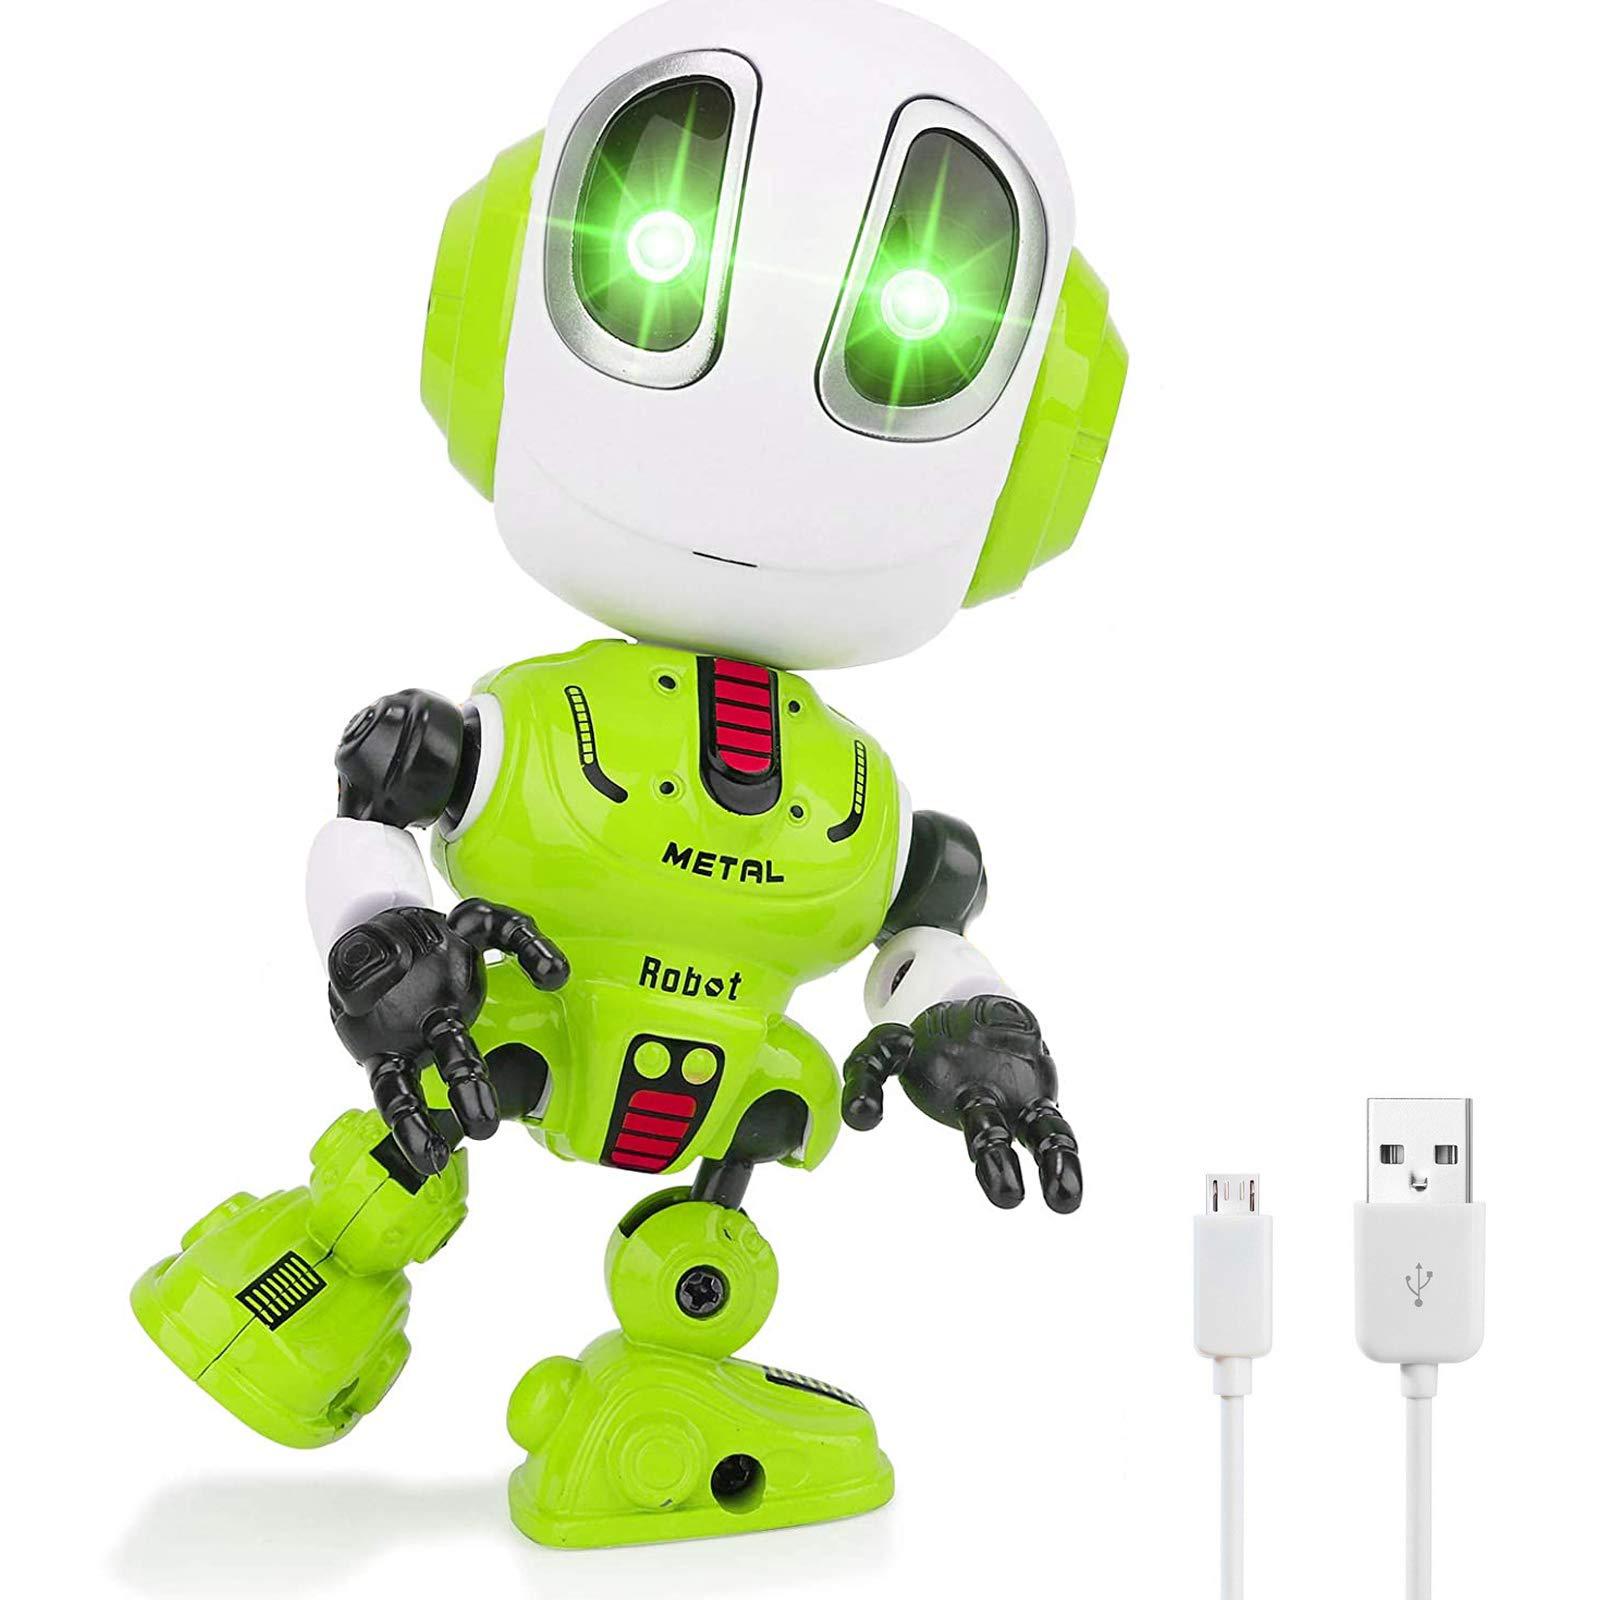 MING YING 66 talking robot for kids toys - mini robot toys that repeats what you say, toys for 2 3 4 5 6 7 8 year old girls and boys,chris